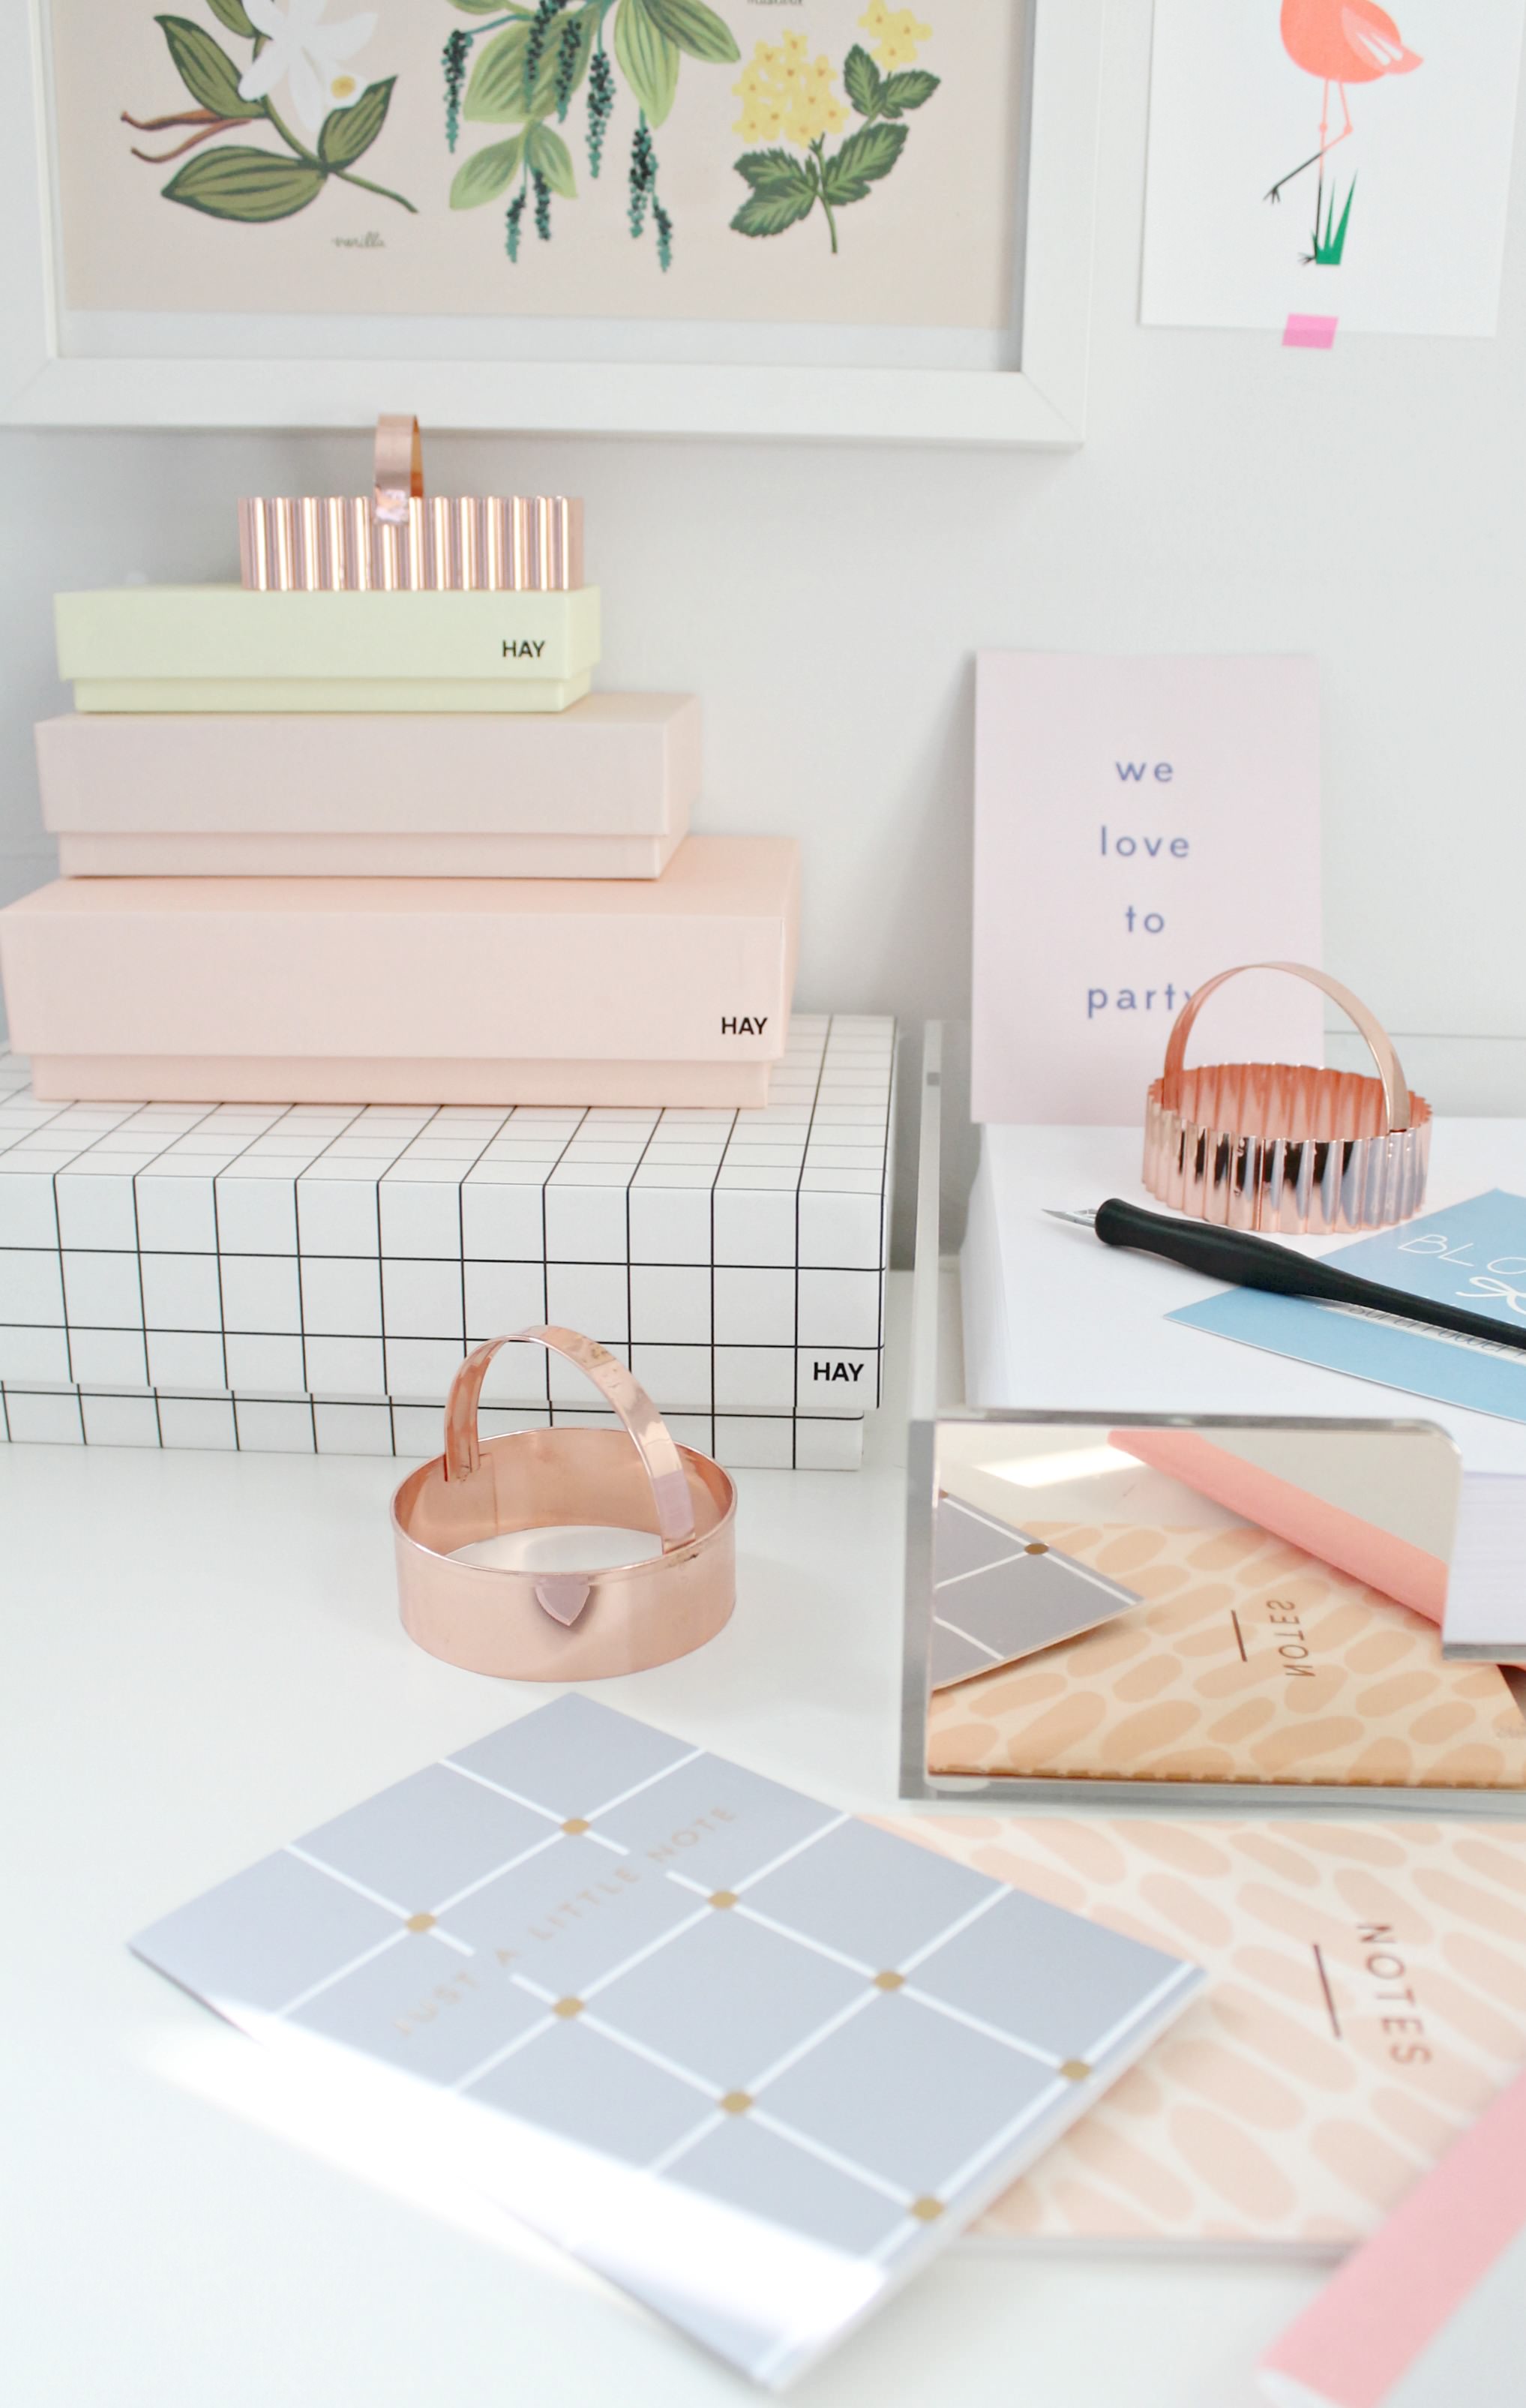 Little-Big-Bell's-workspace-photo-and-styling-3-by-Geraldine-Tan